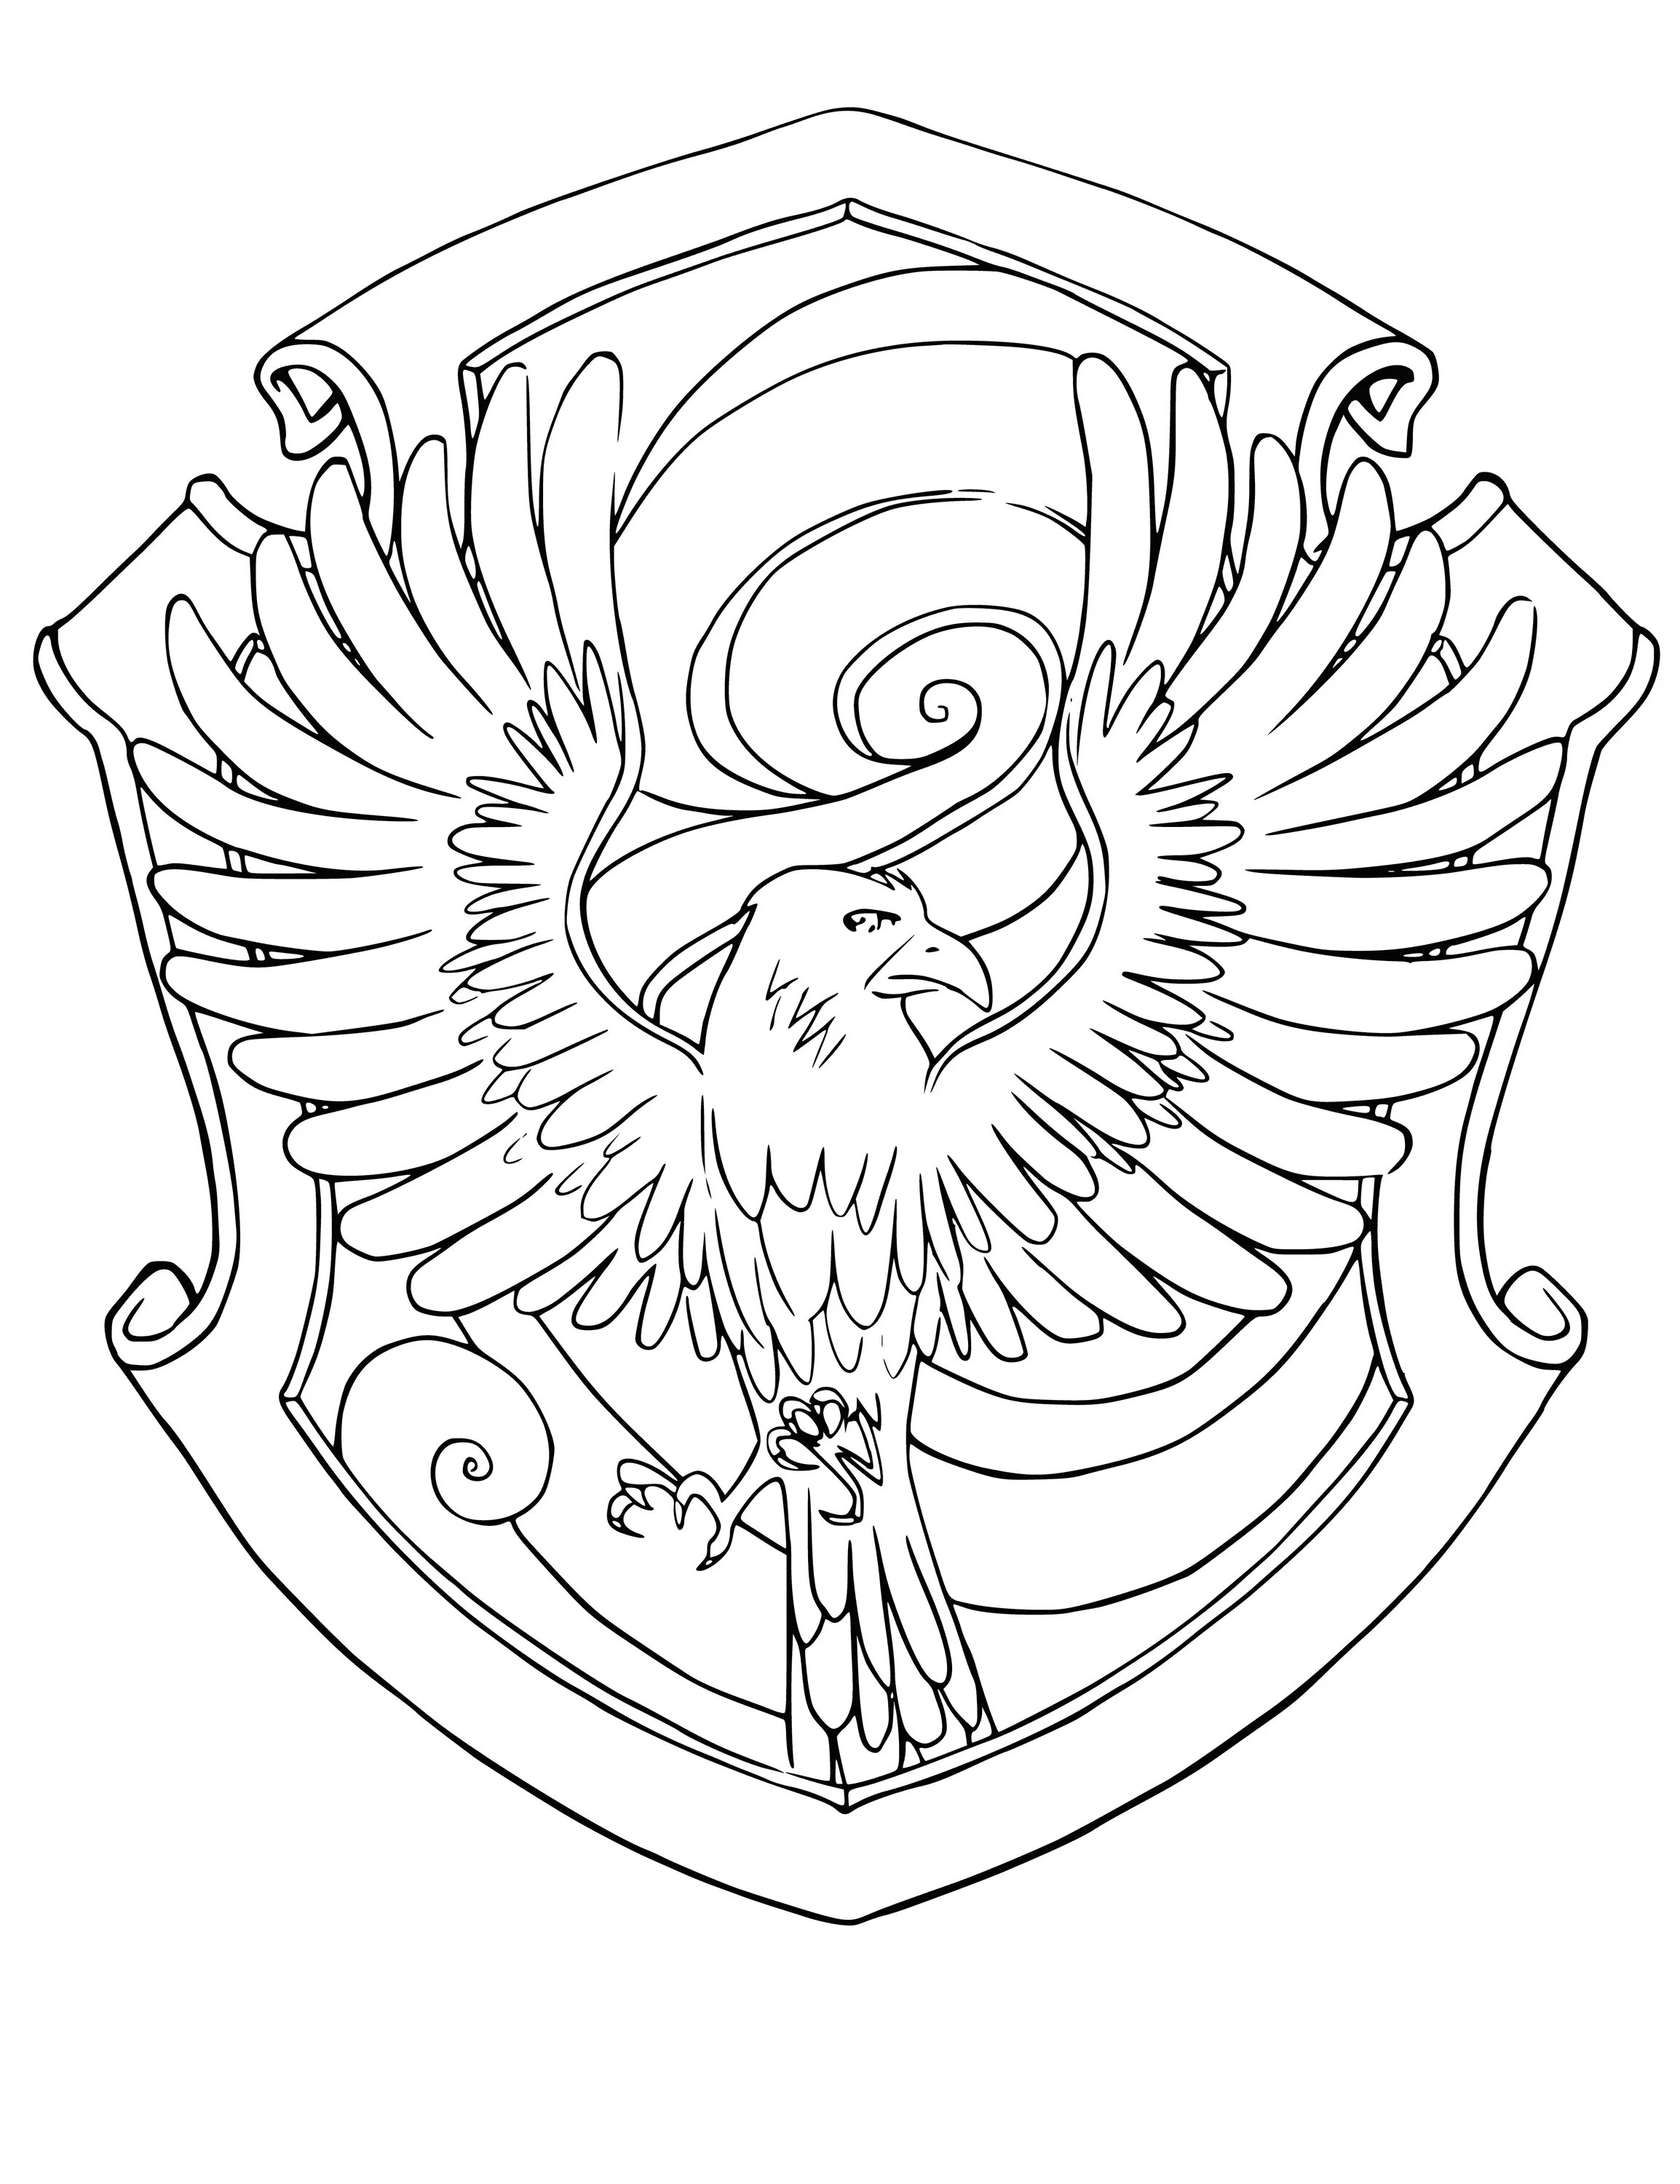 Detailed ravenclaw coloring page